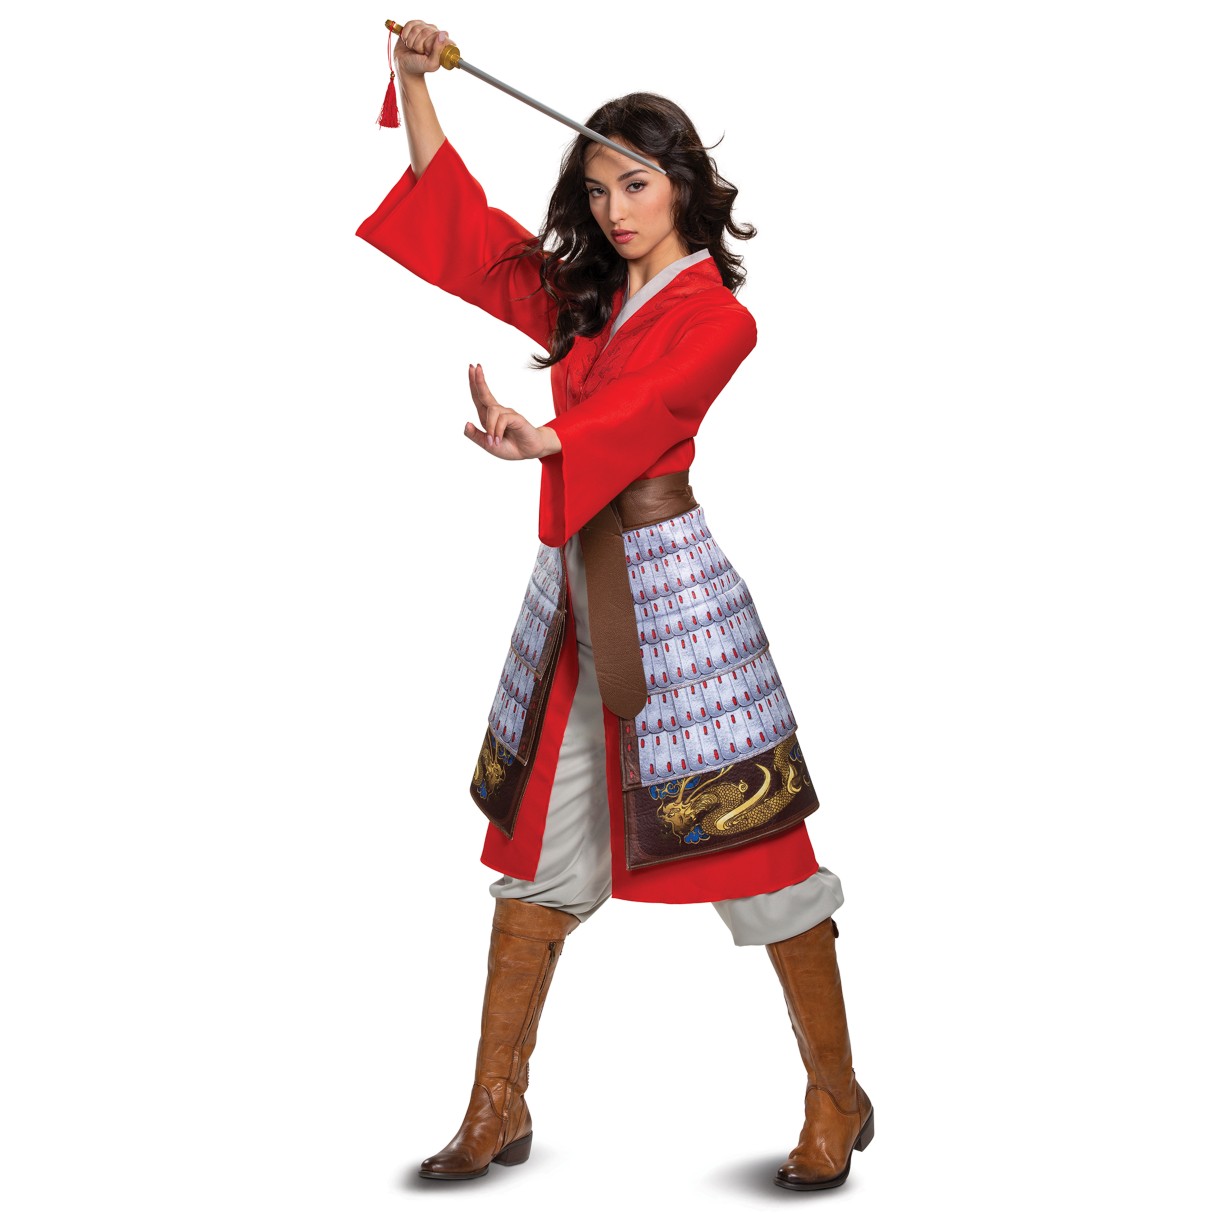 Mulan Deluxe Costume for Adults by Disguise – Live Action Film